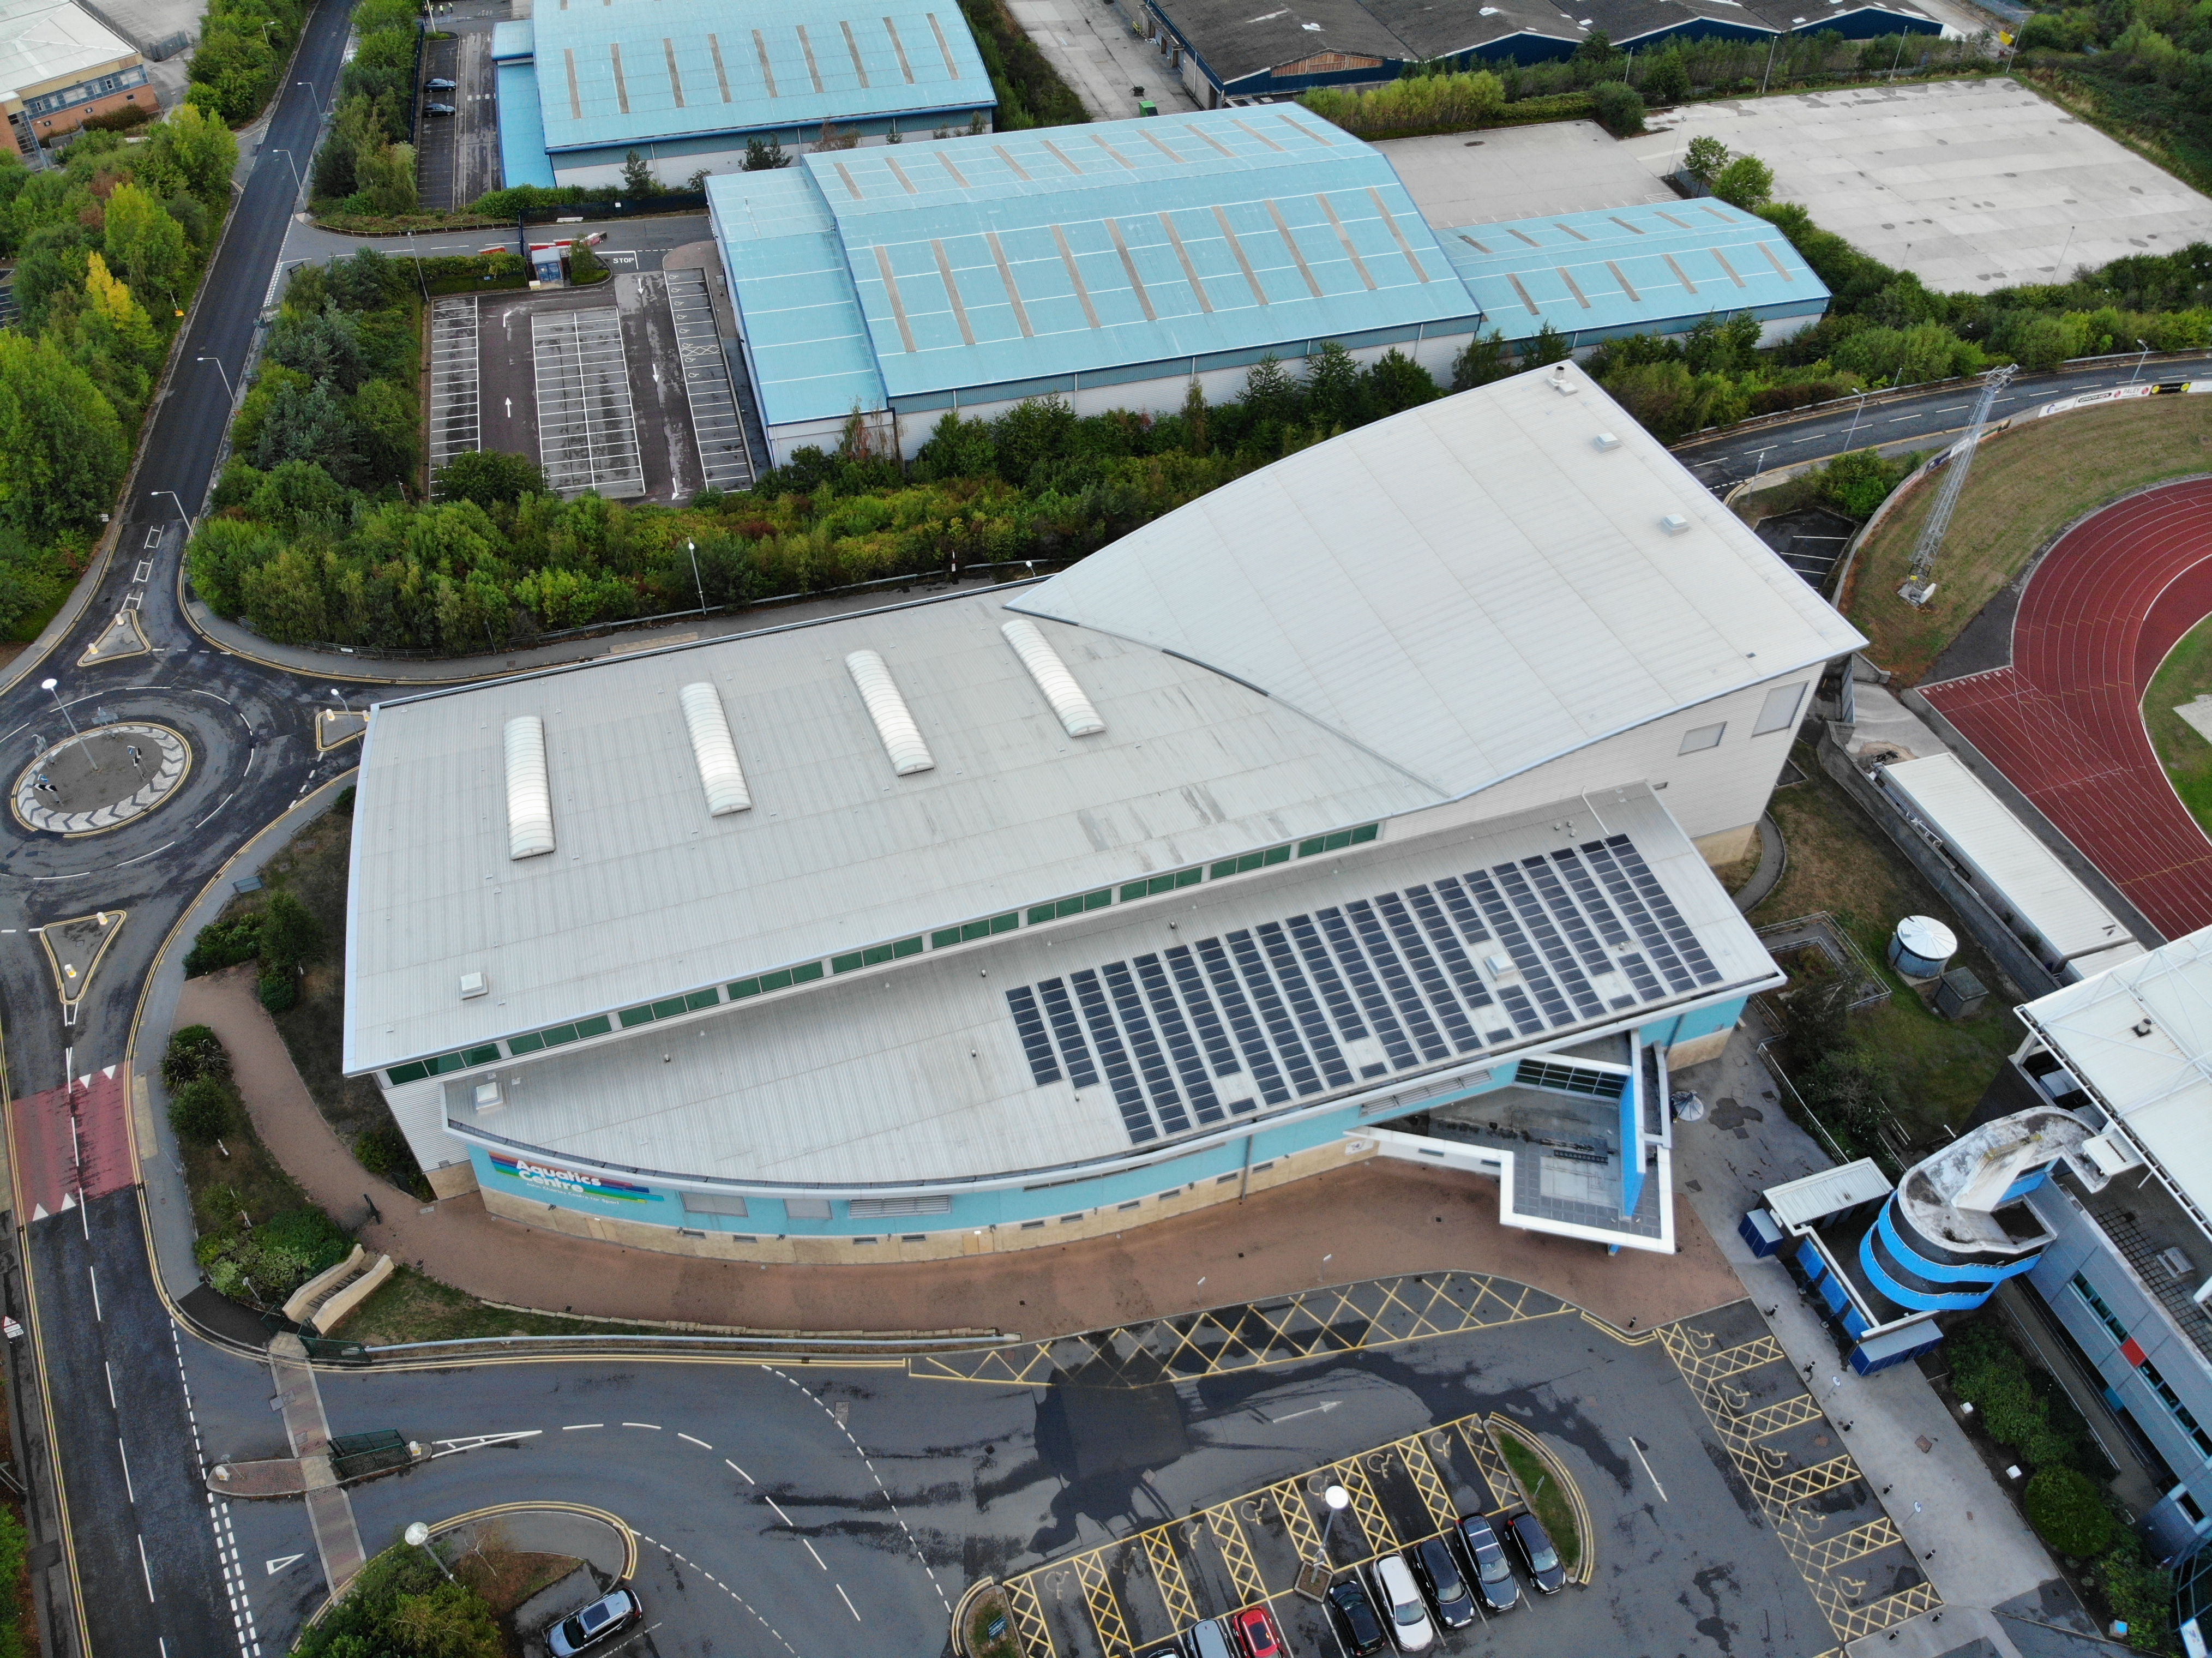 John Charles Centre for Sports Aerial photo taken with a drone in Leeds